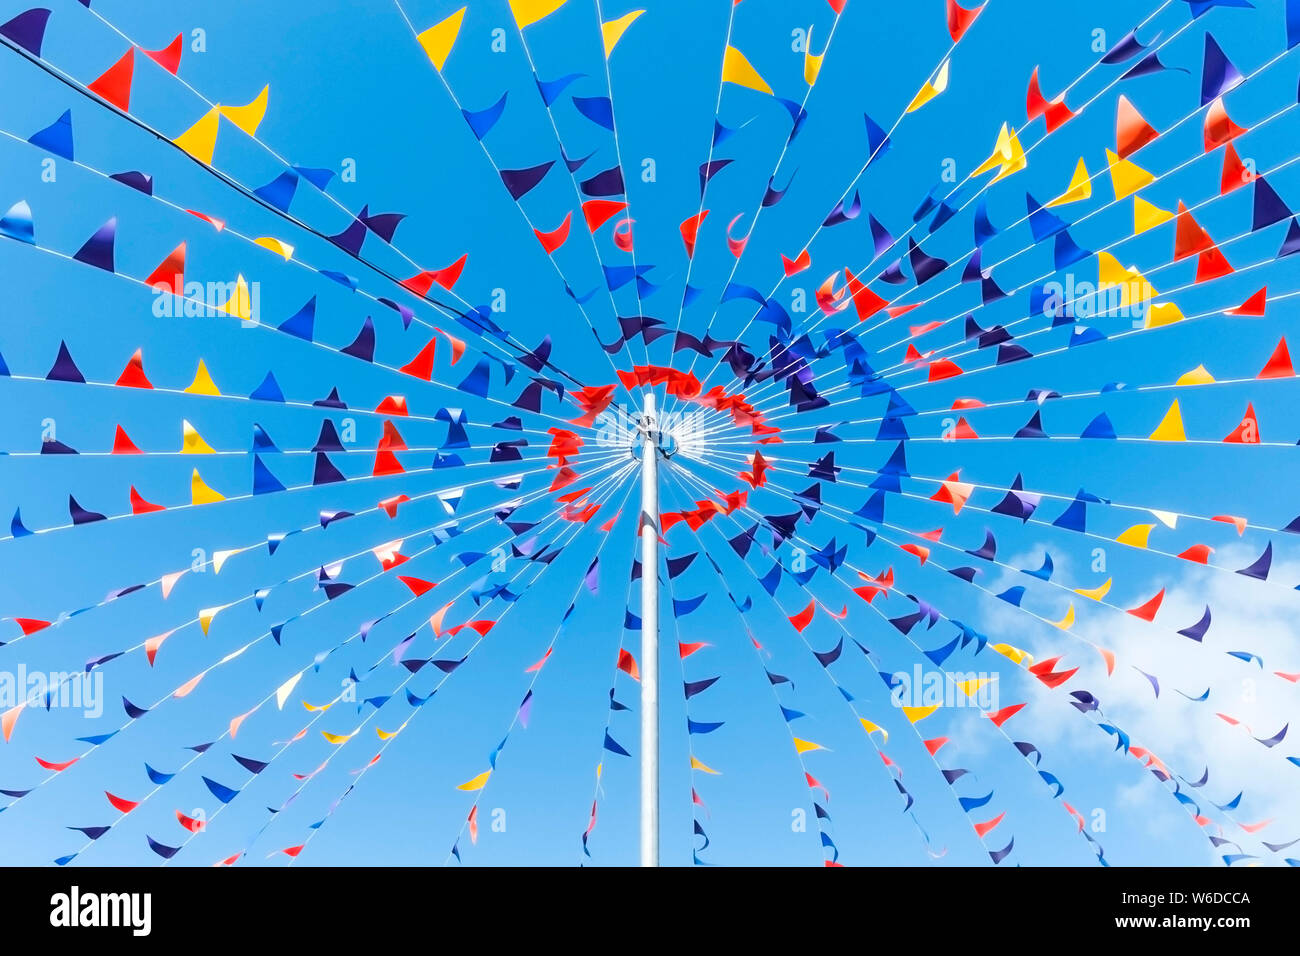 Colourful bunting attached to a pole seen against a bright blue sky. Stock Photo